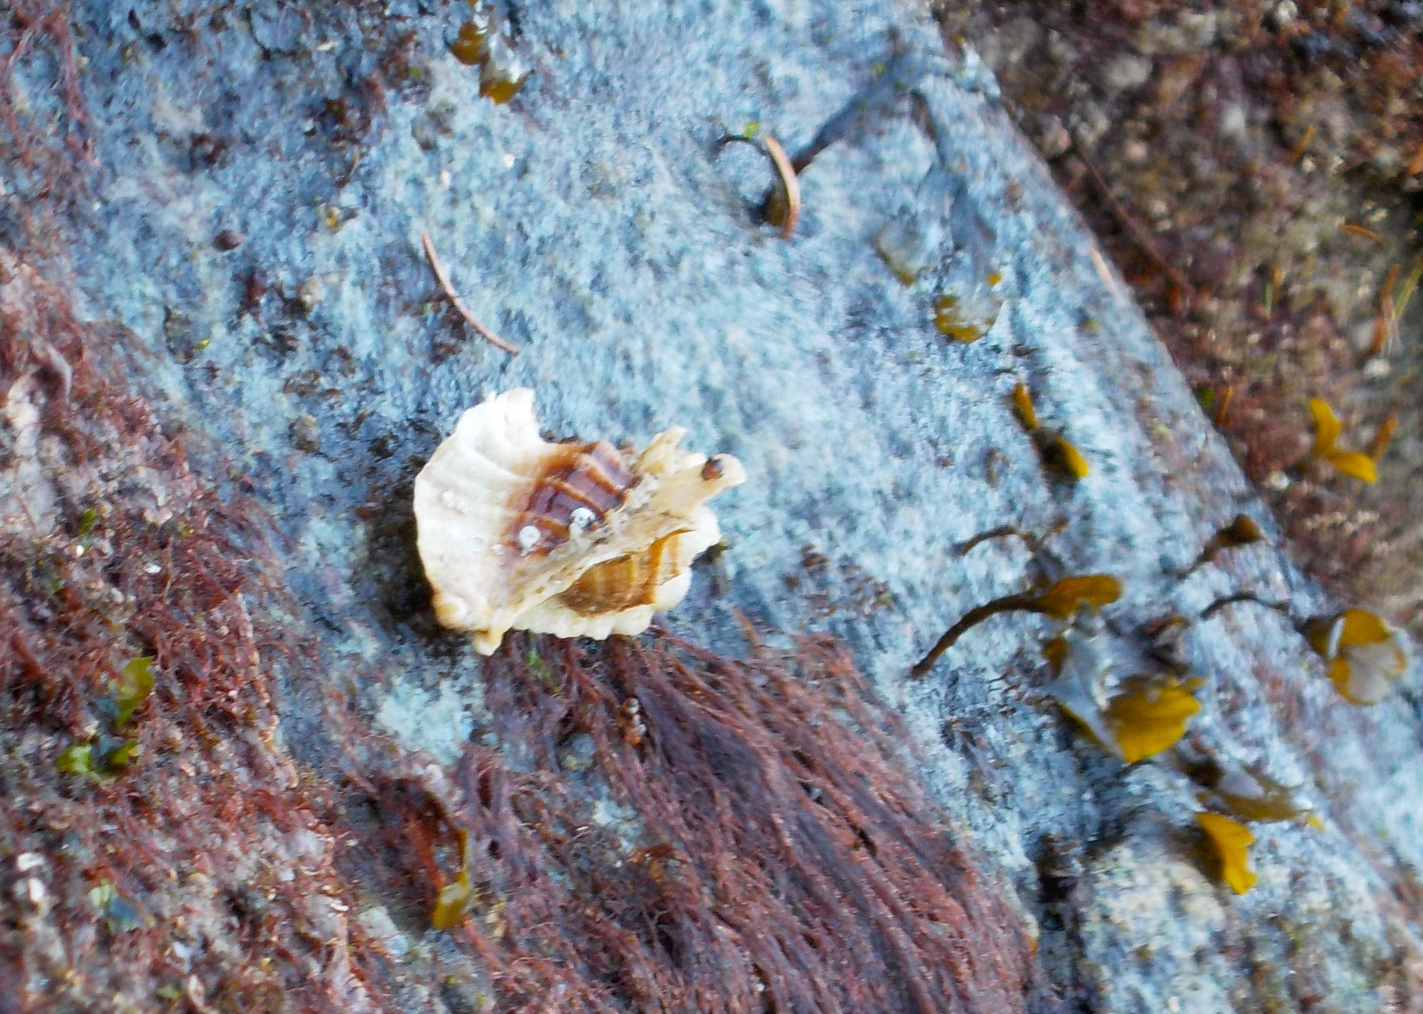  This whelk, a leafy hornmouth , can bore through the shells of its prey with its radula. The radula is a tongue-like structure unique to mollusks. 